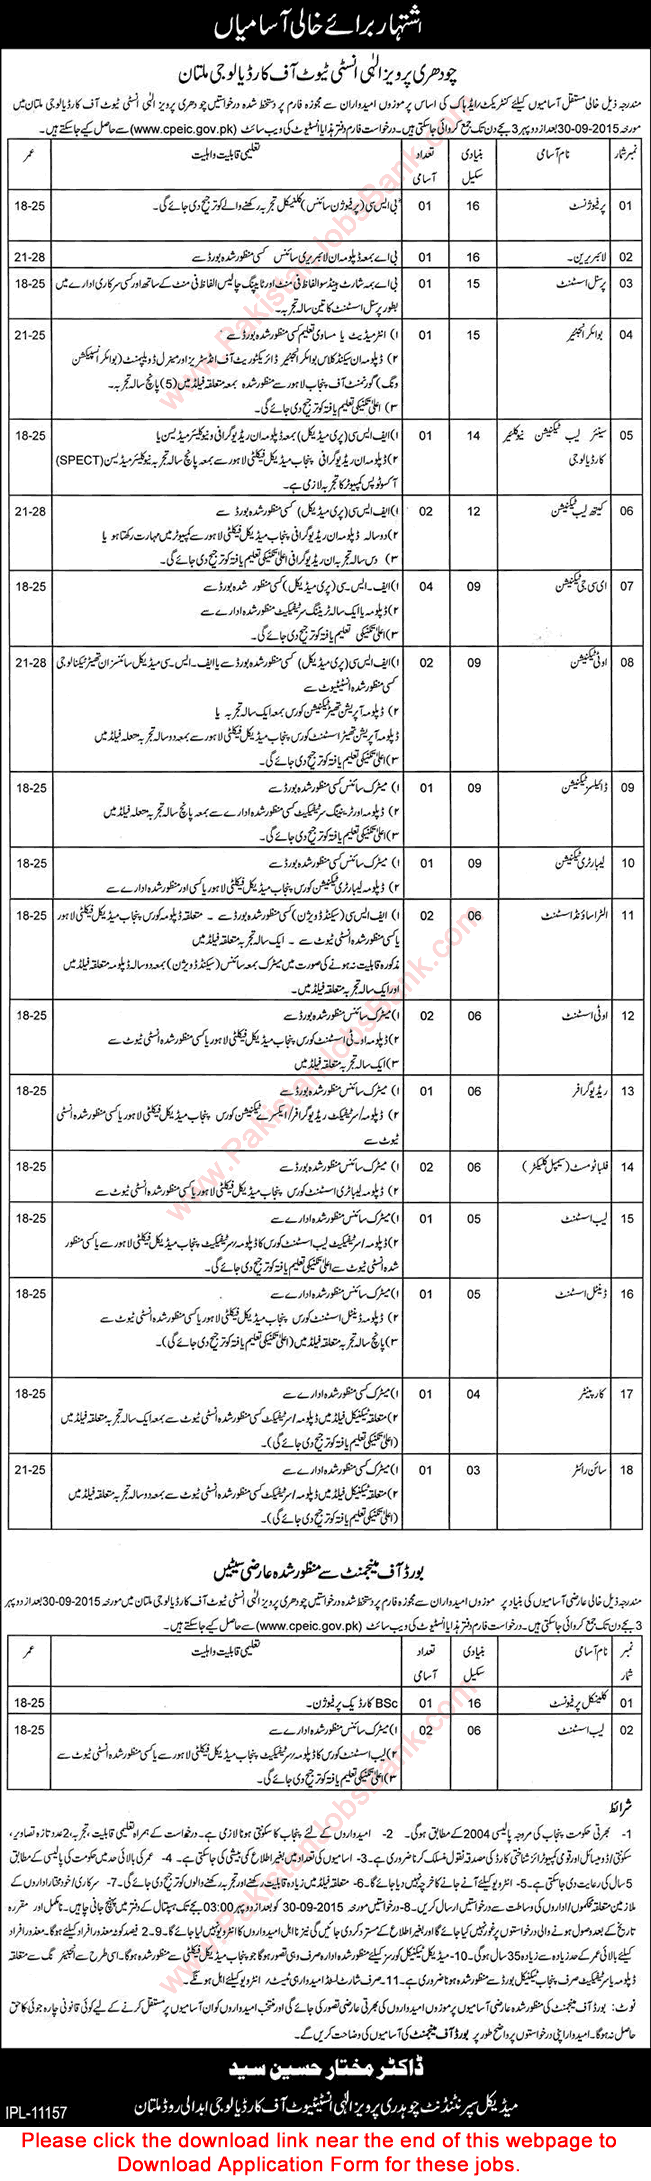 Chaudhry Pervaiz Elahi Institute of Cardiology Multan Jobs 2015 August Application Form Download Latest